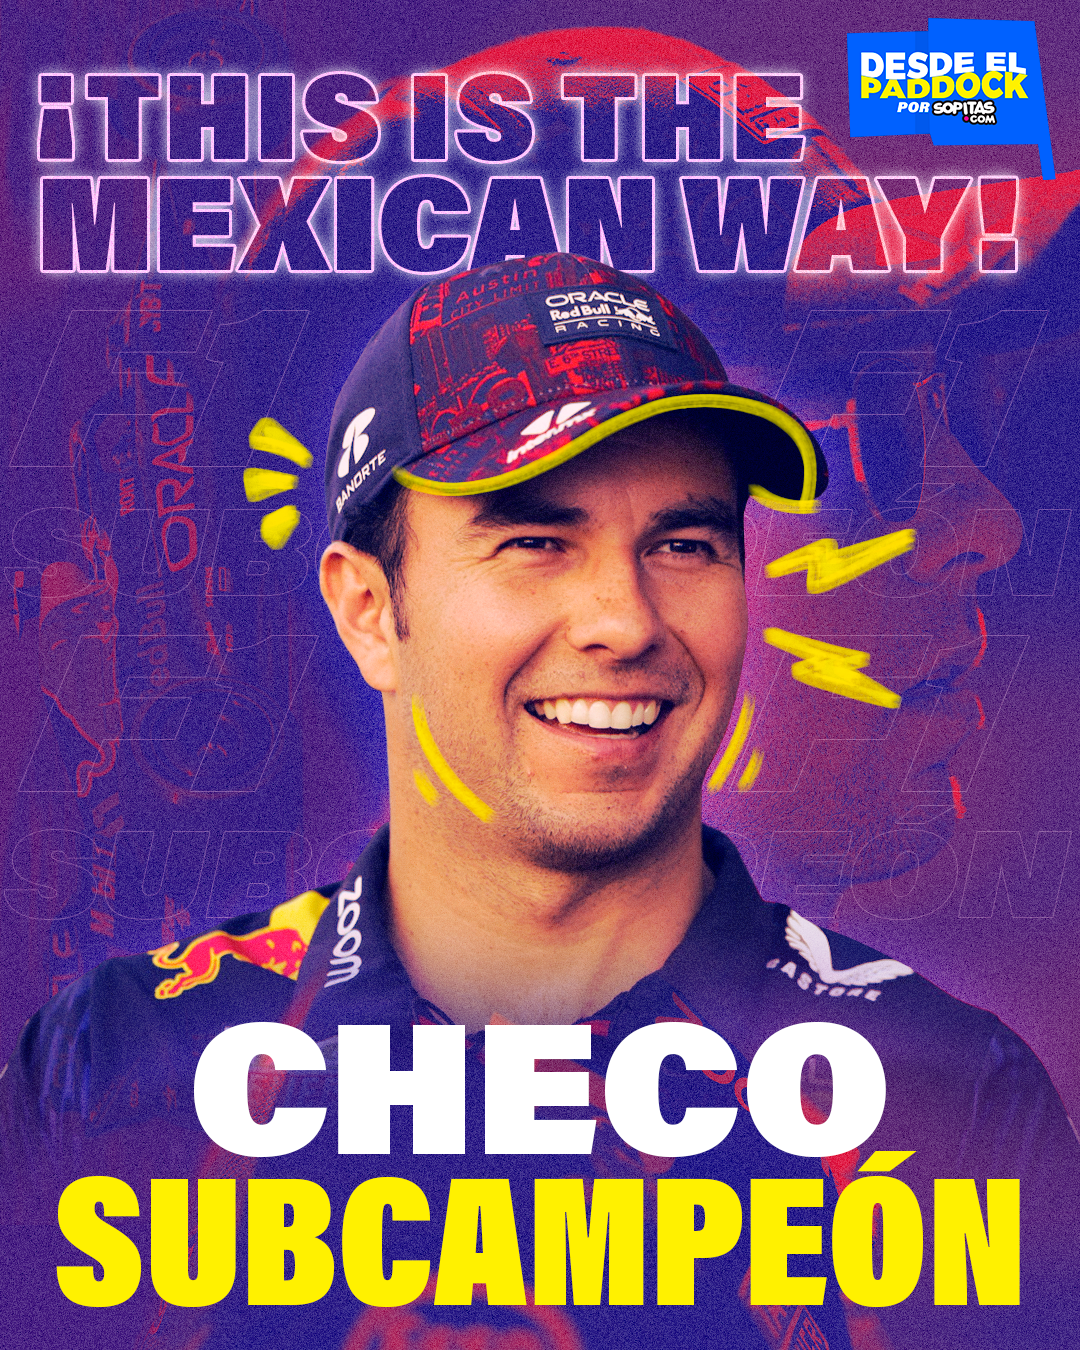 Checo Pérez climbs to the podium at the Las Vegas GP and is runner-up in drivers